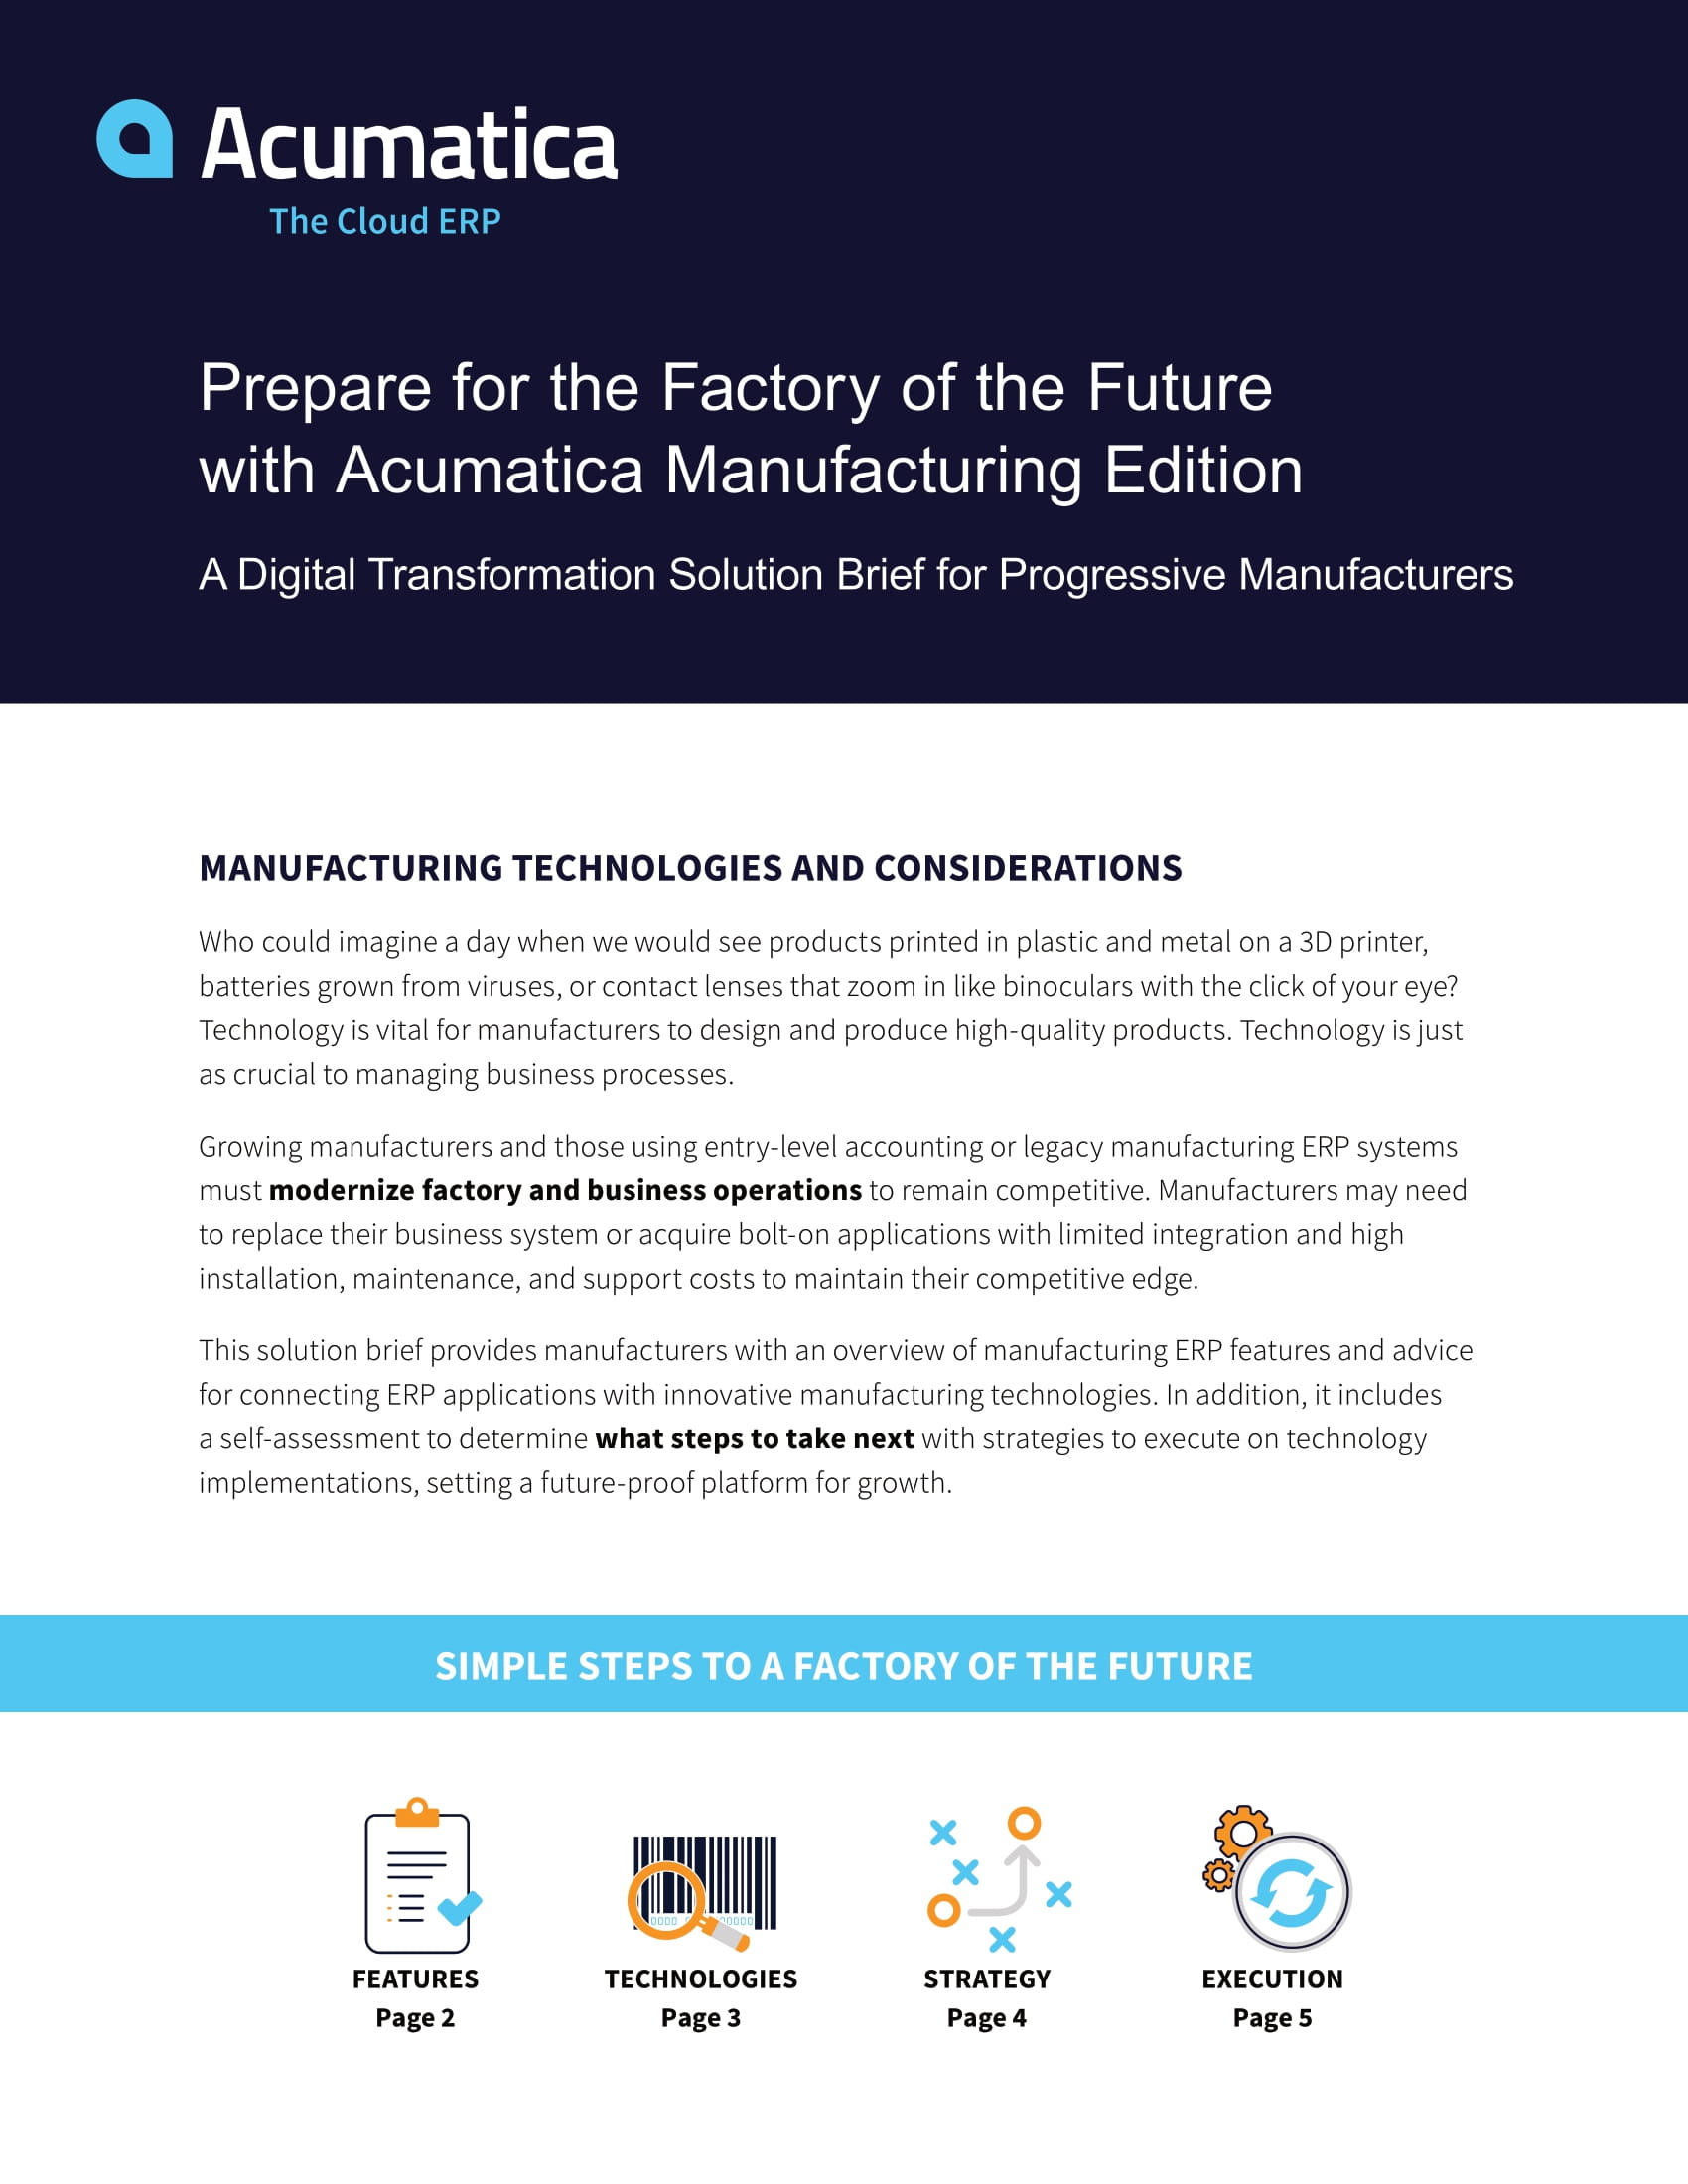 Why Manufacturers of Today Need Modern Manufacturing Technology for the Future